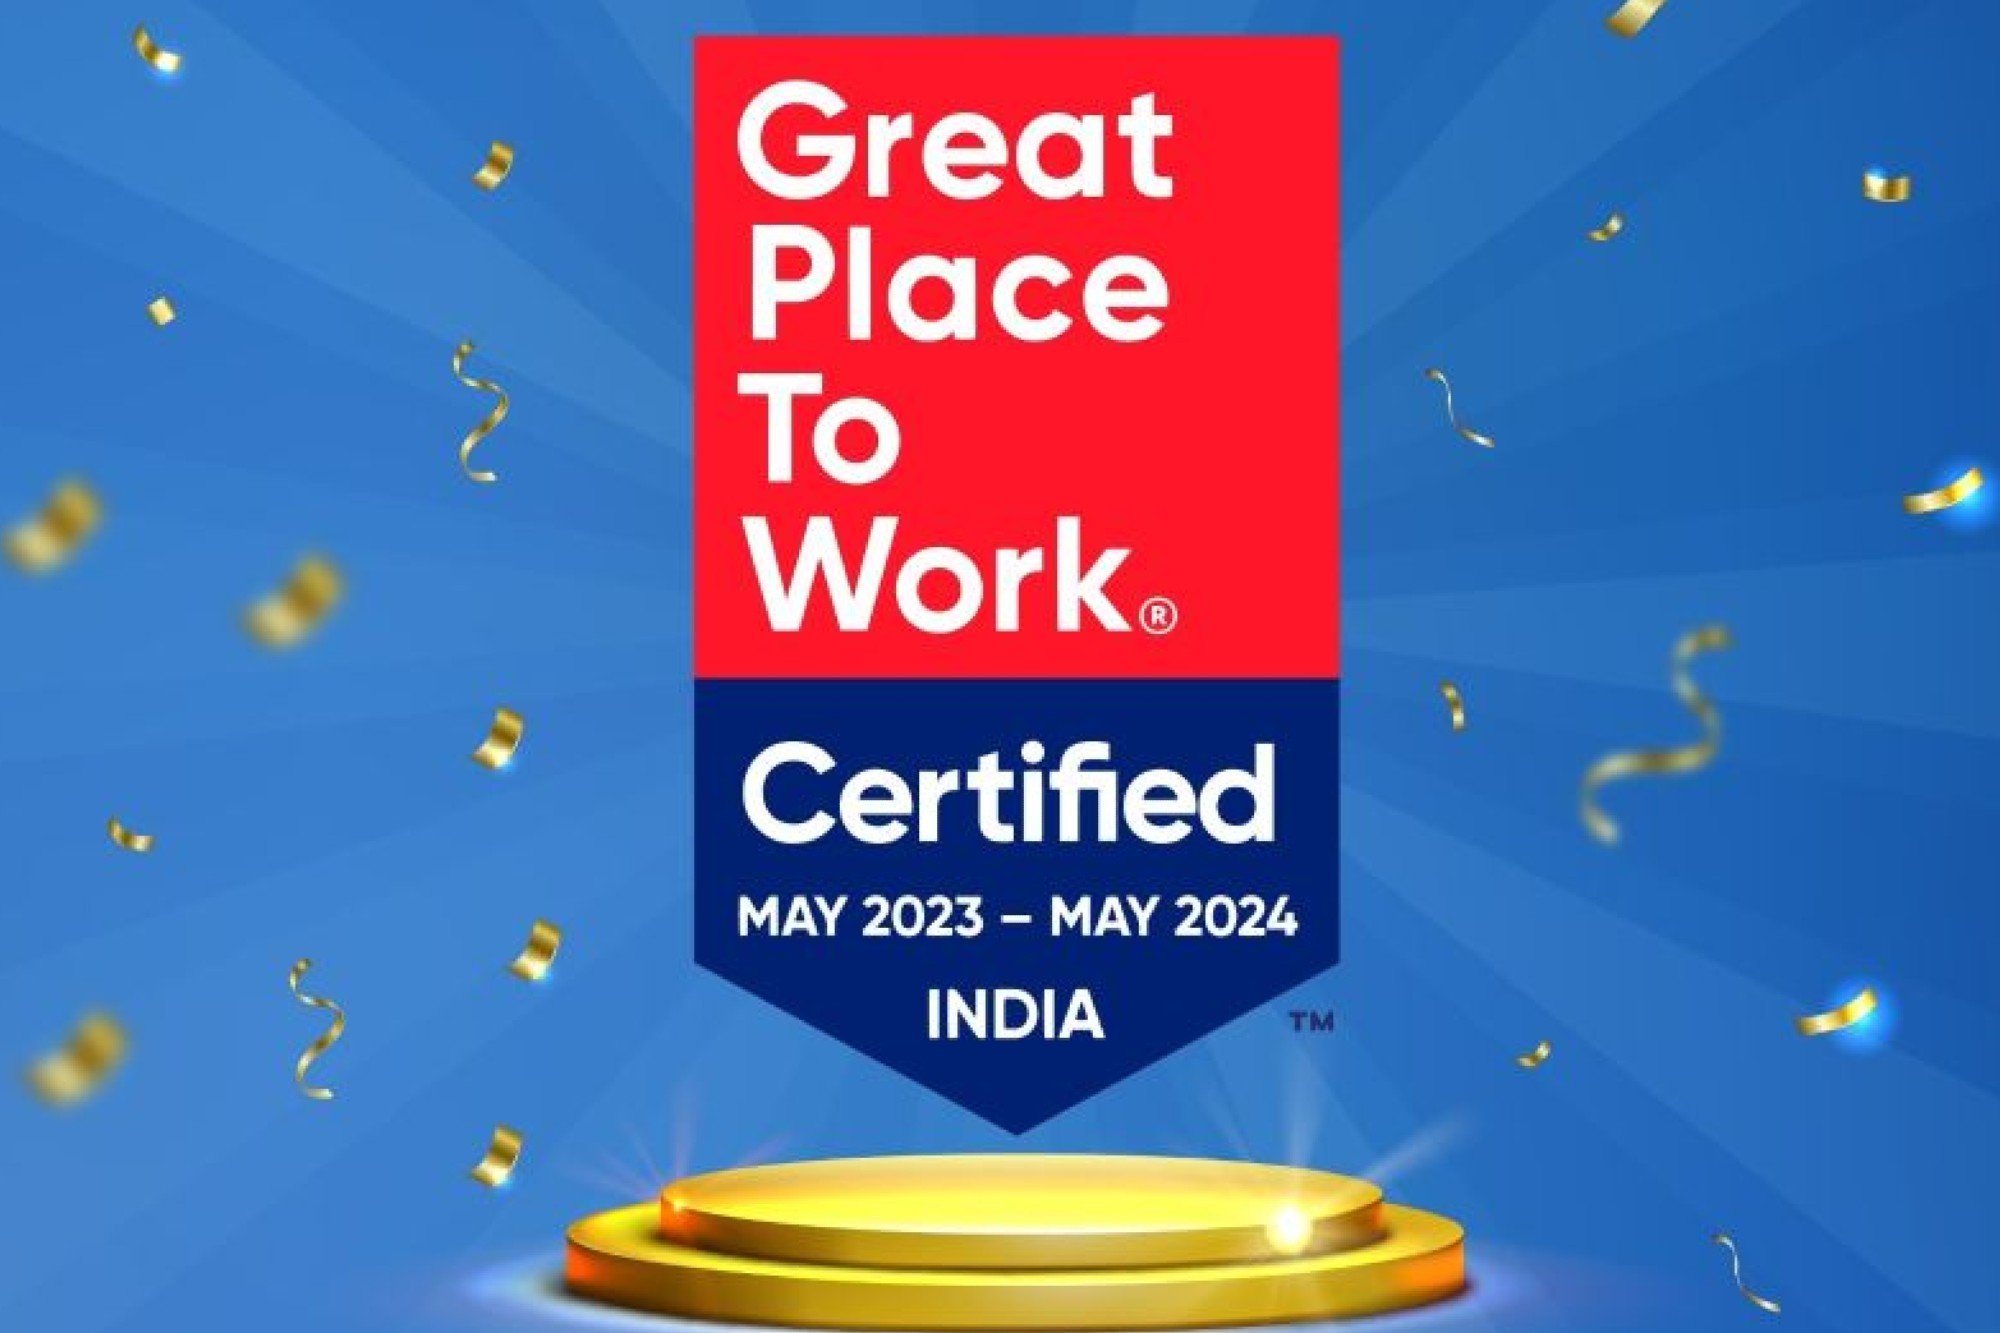 Fuji Electric India is recertified as a great place to work for 2024